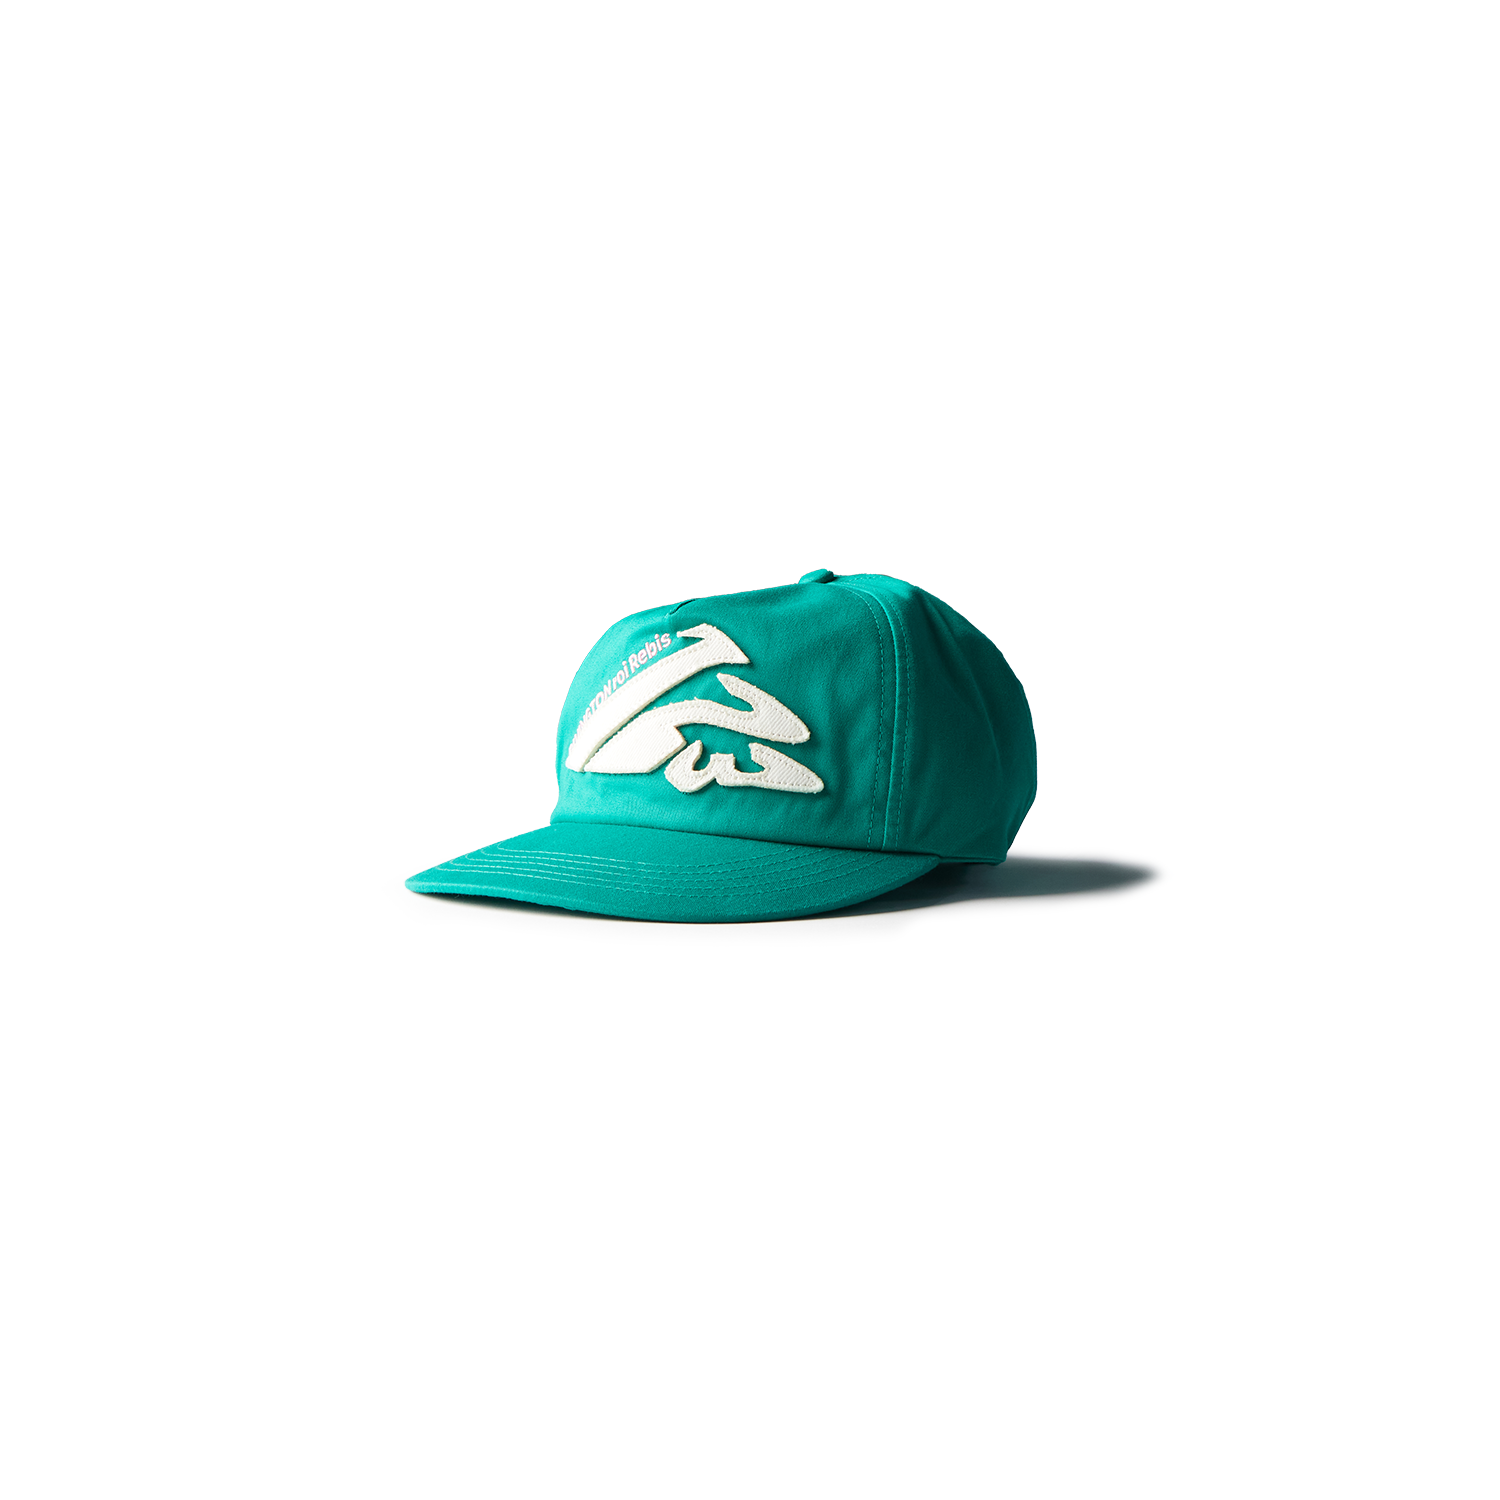 RRR123 - Gymgno Hat product image